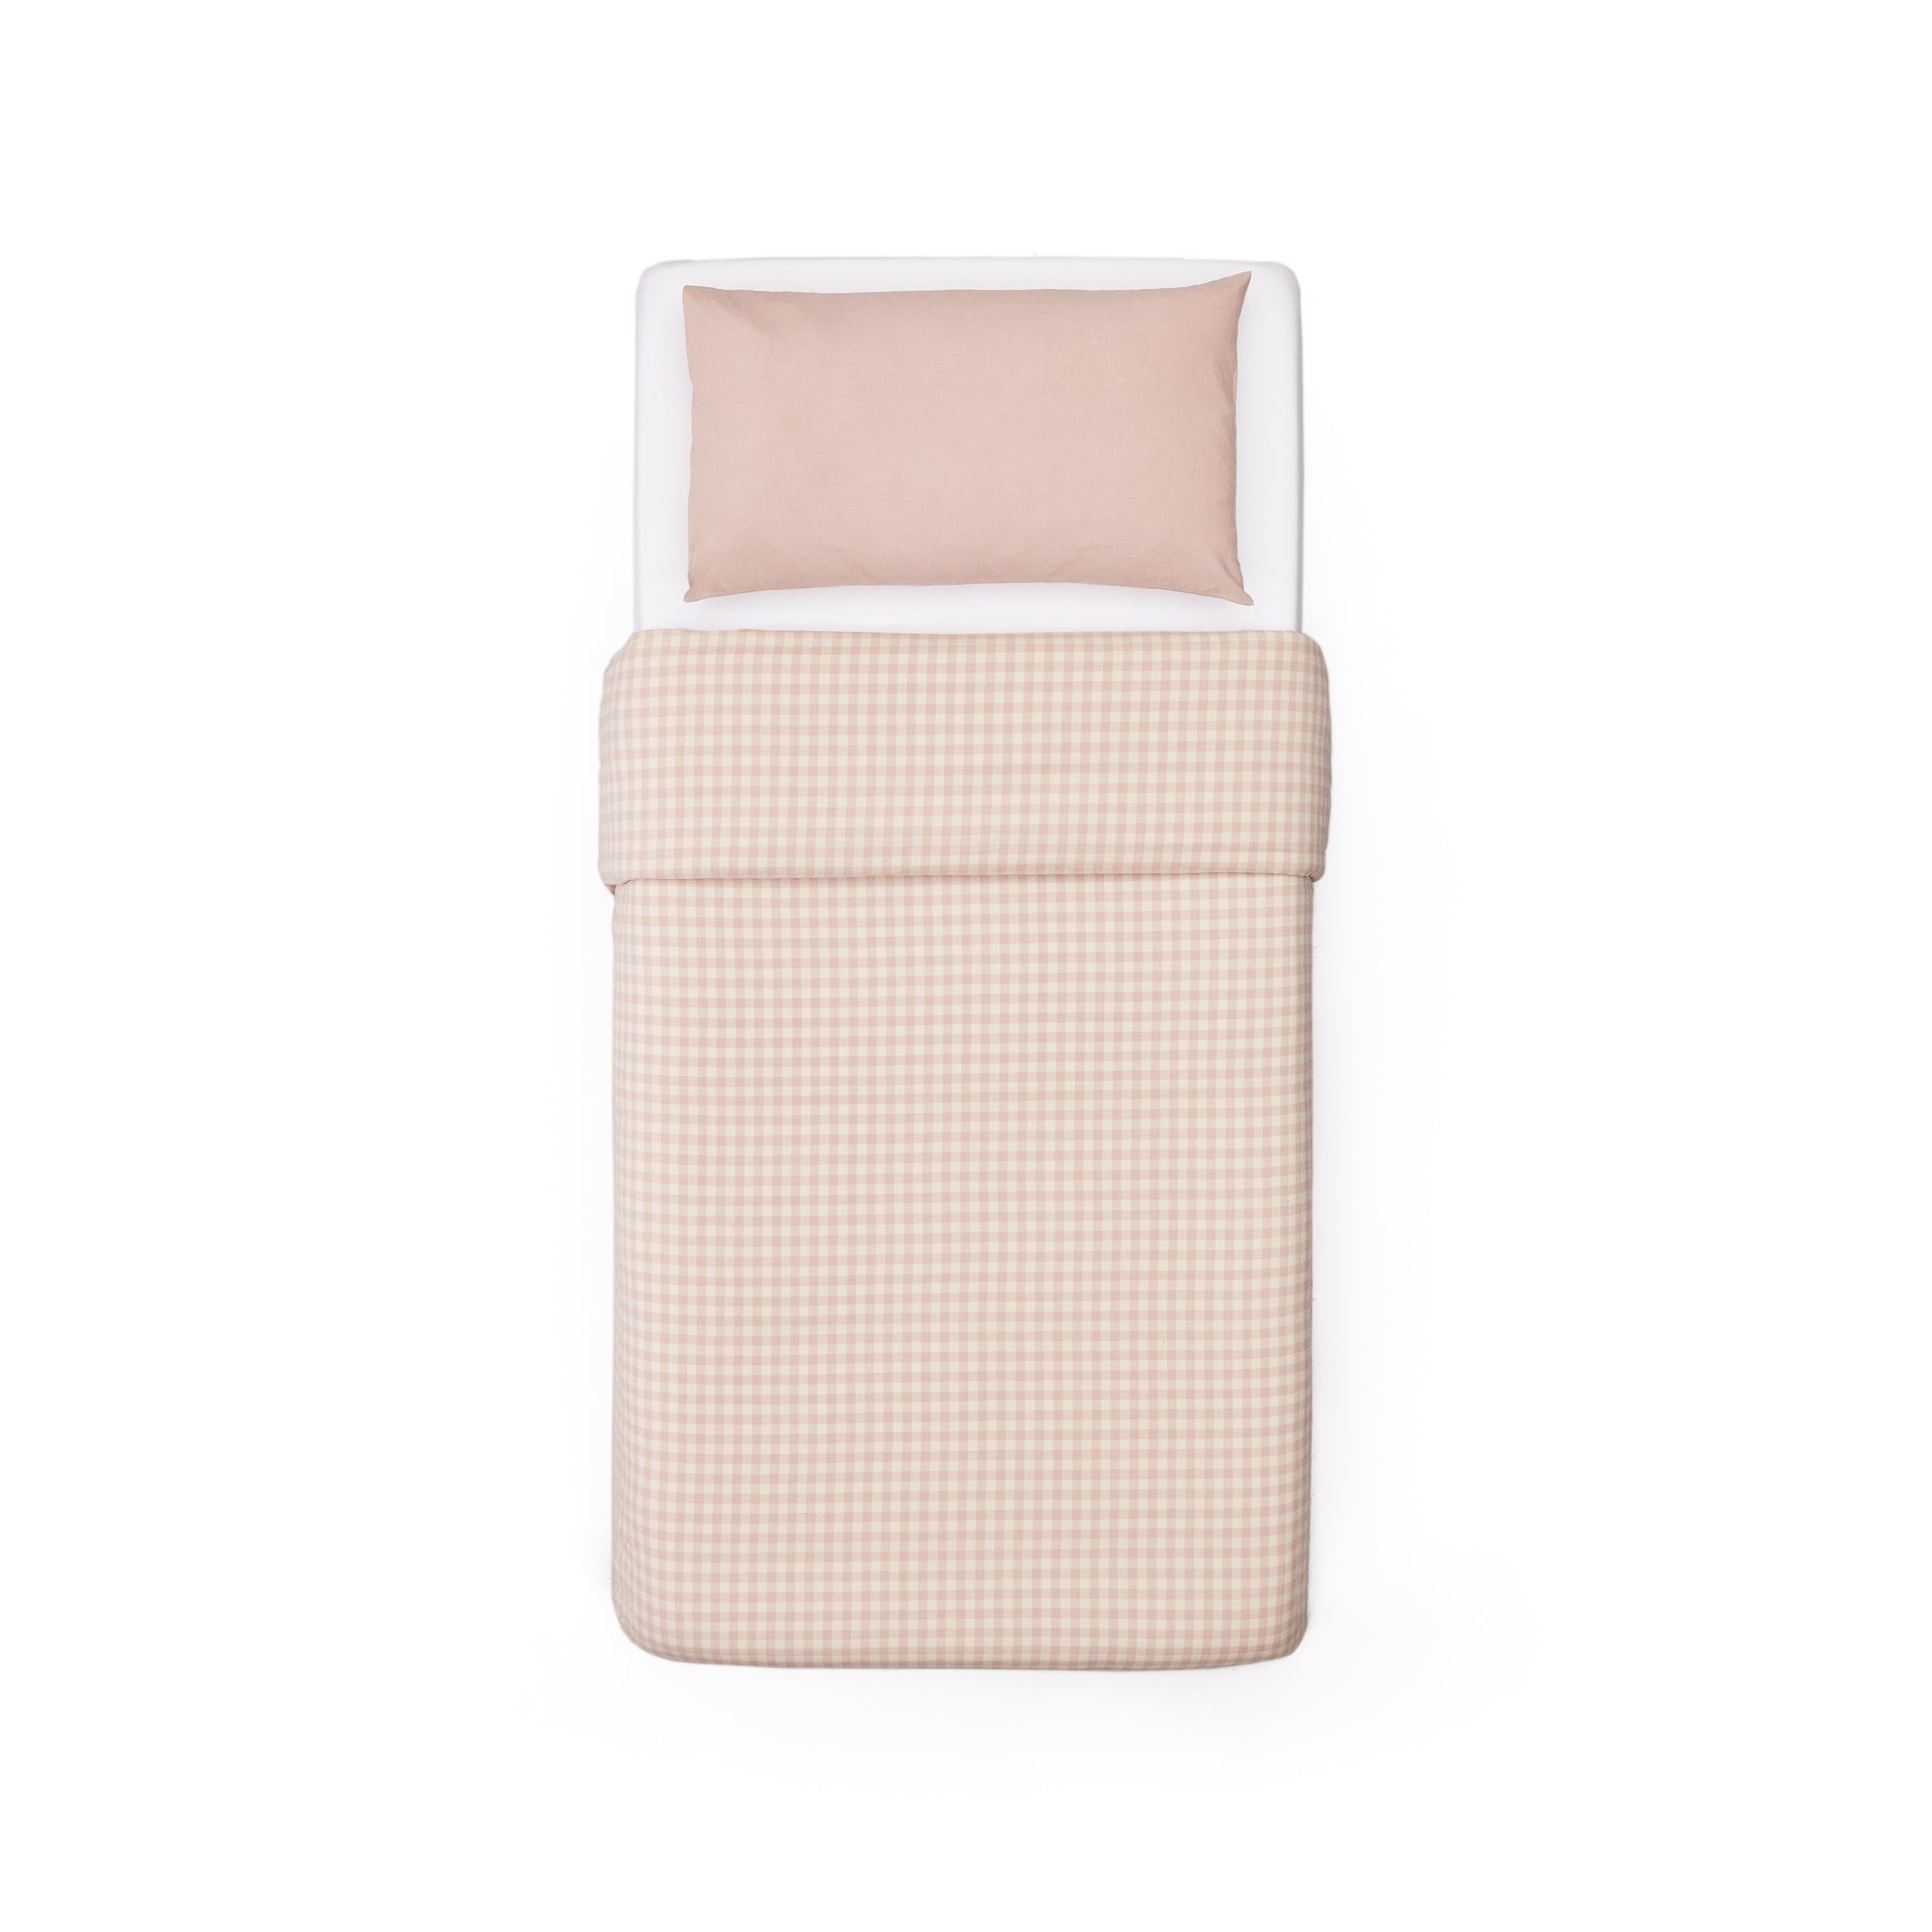 Set Yanil duvet cover, bottom and pillowcase 100% cotton pink and beige squares 70x140cm